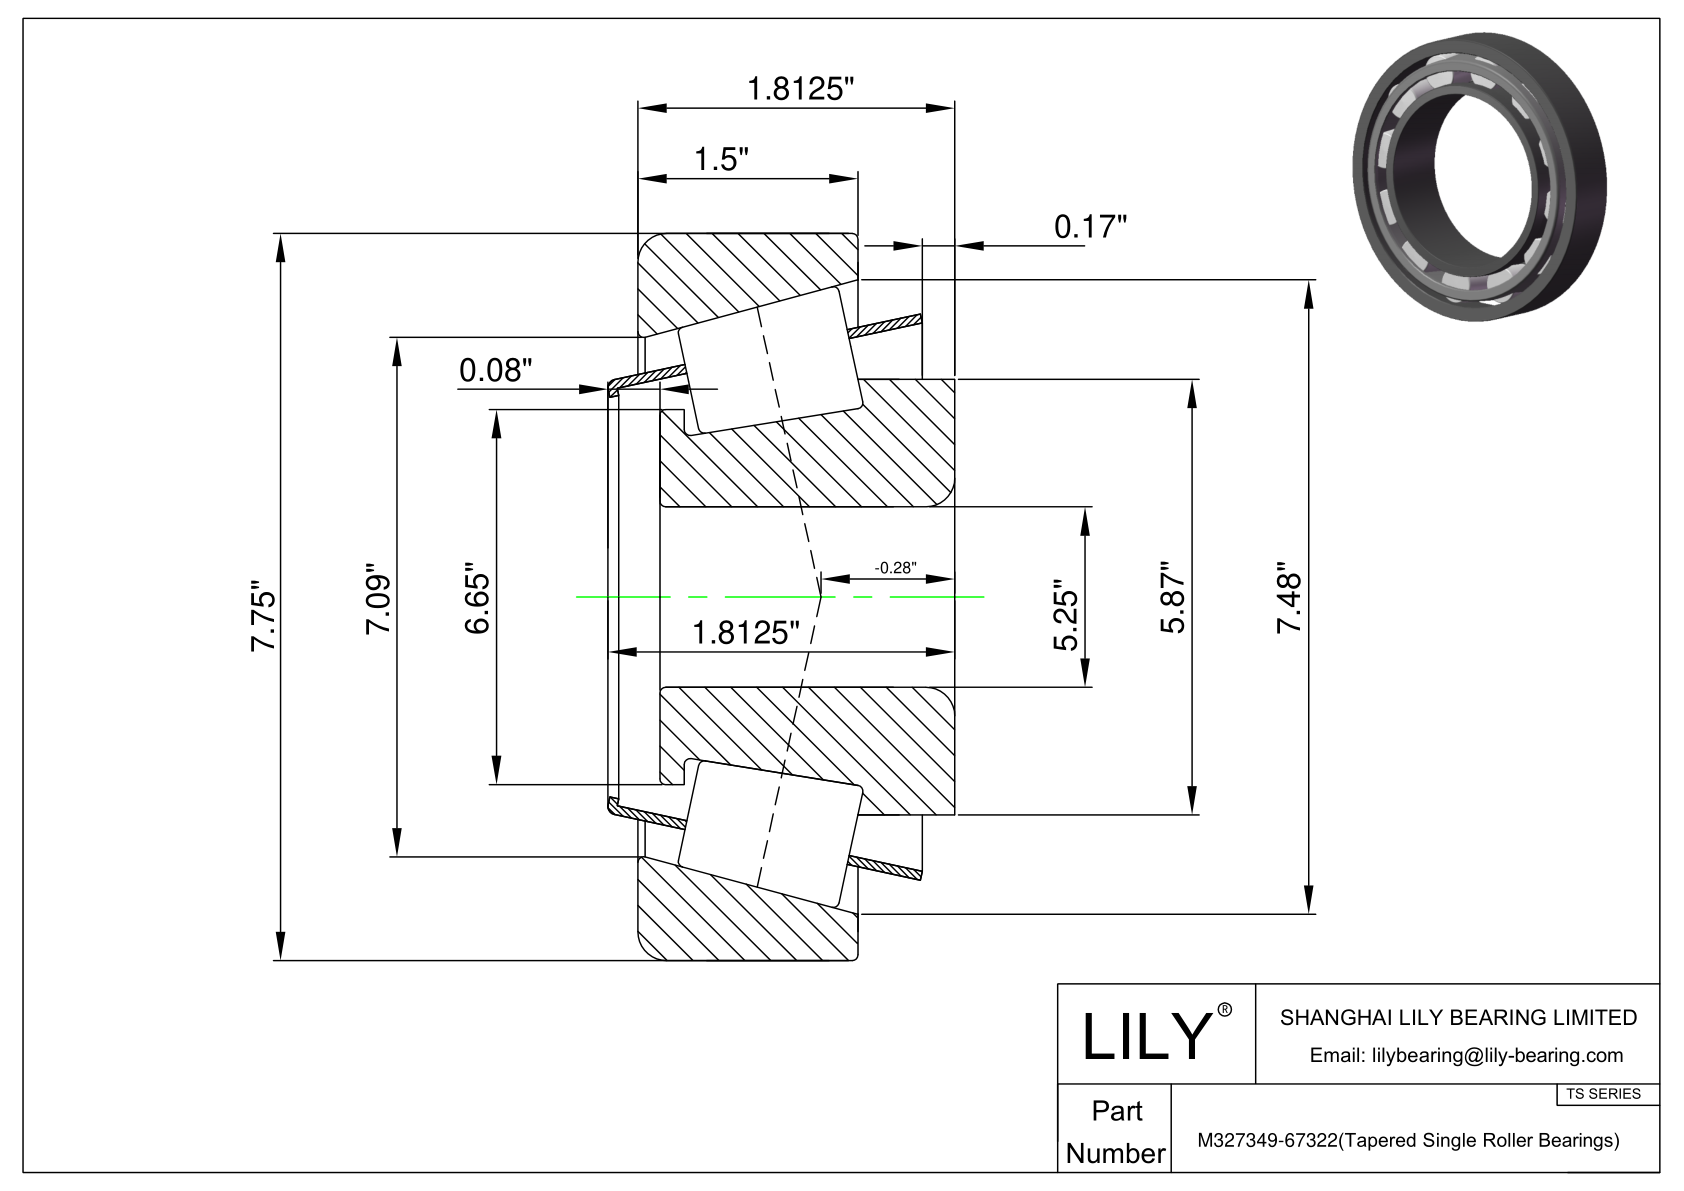 M327349-67322 TS (Tapered Single Roller Bearings) (Imperial) cad drawing